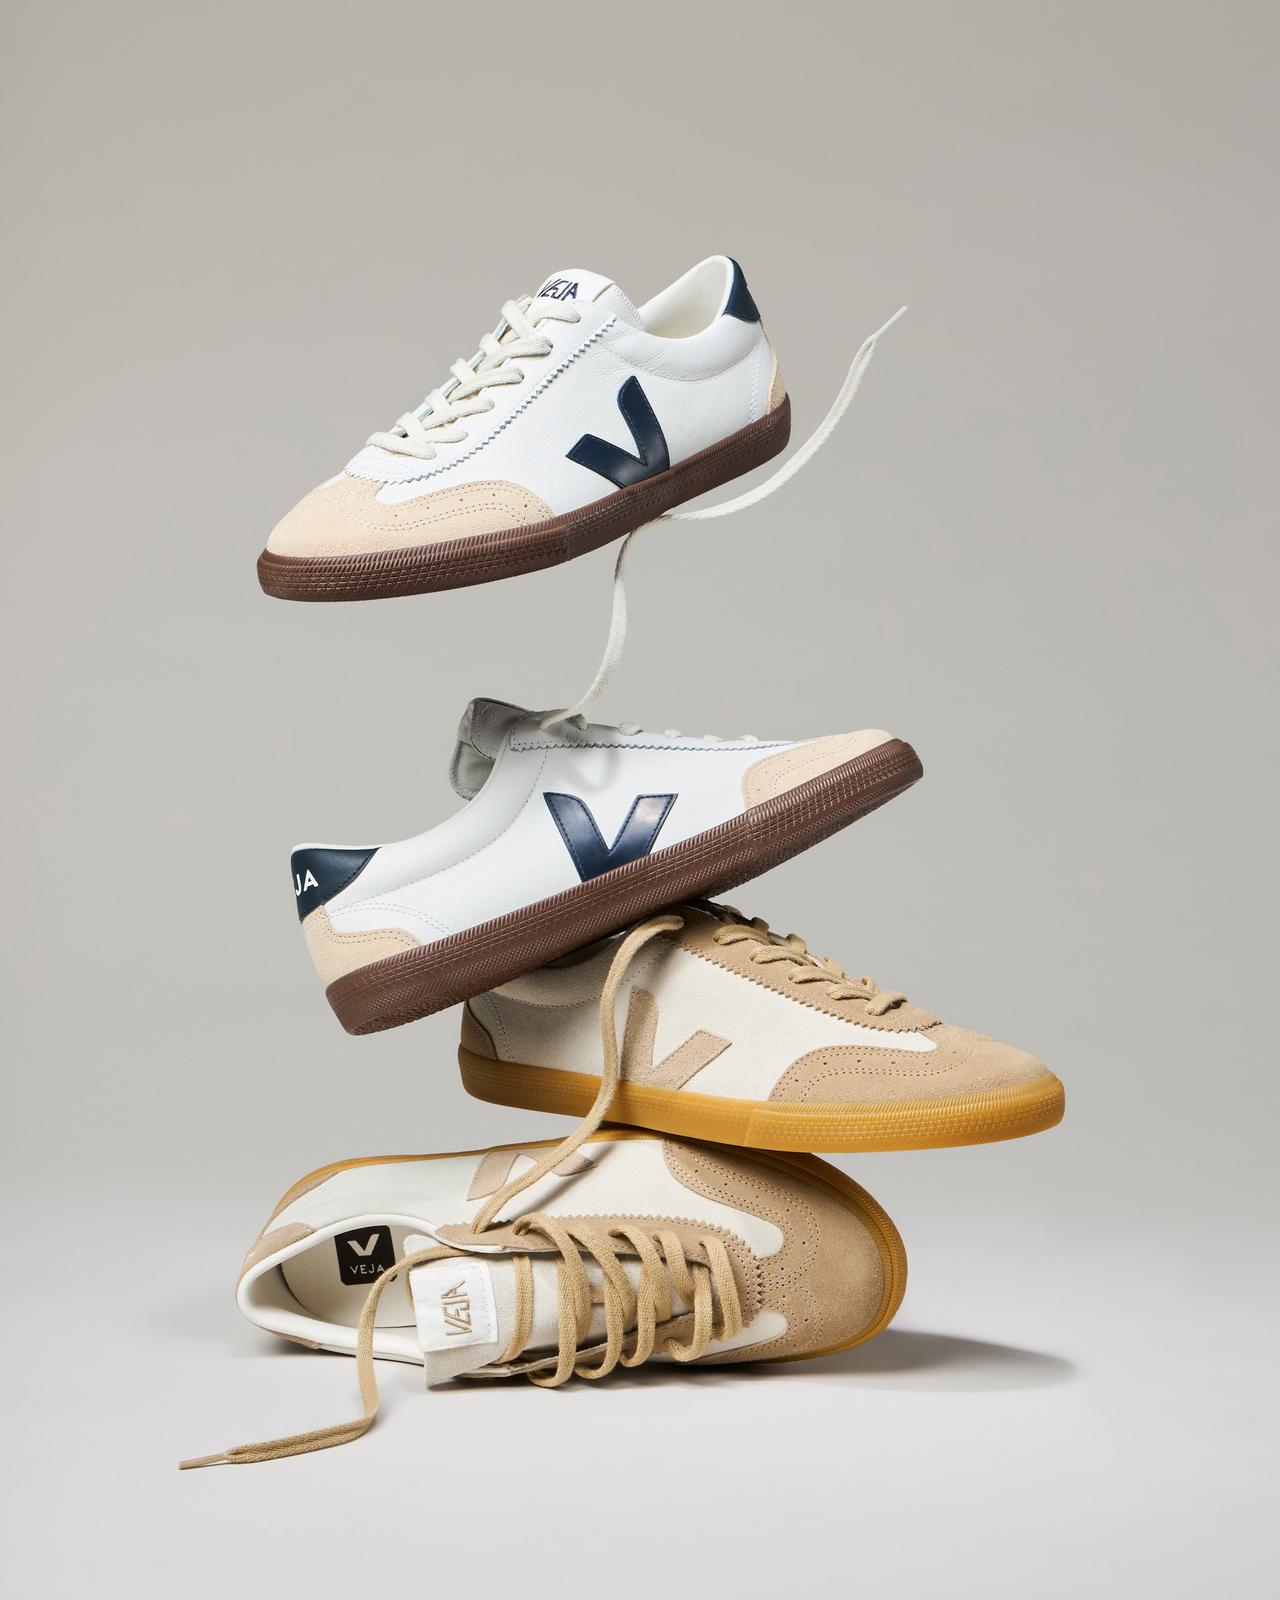 Four pairs of VEJA sneakers stacked on top of each other